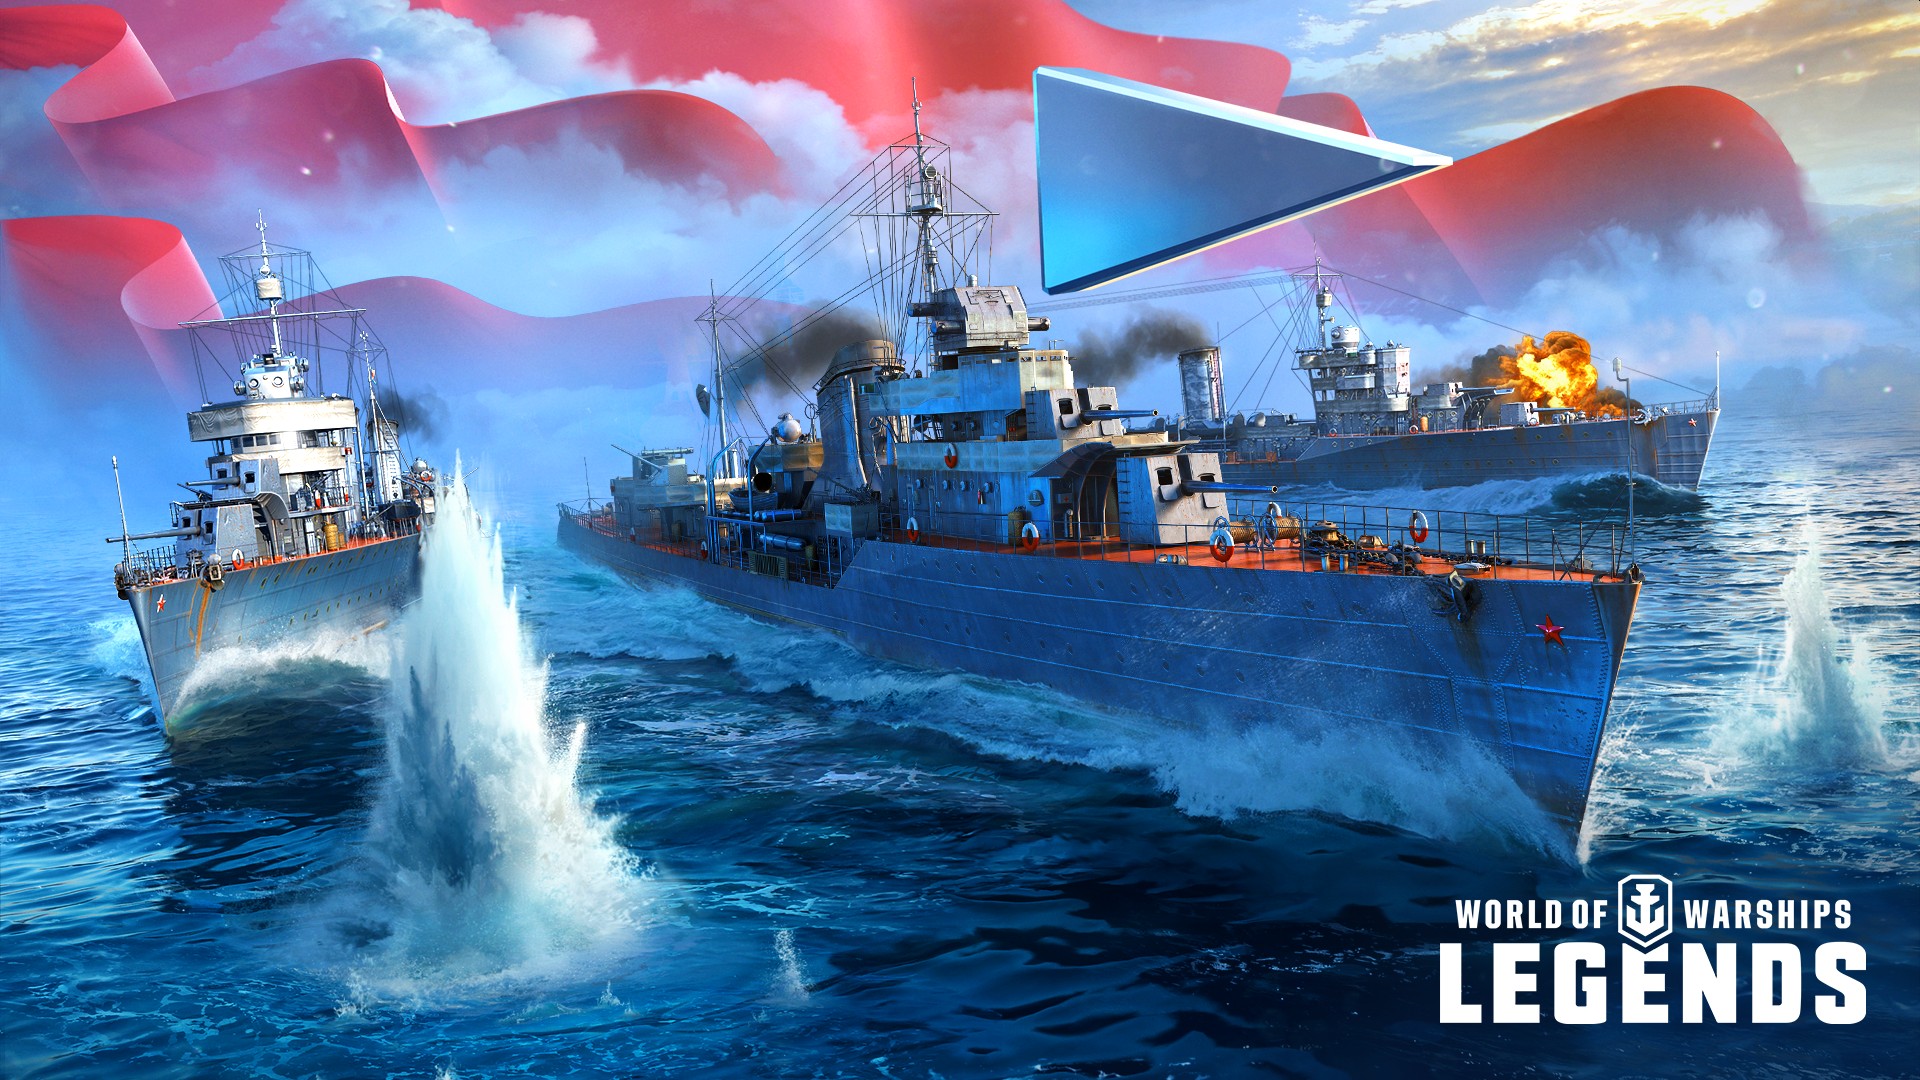 Preview The New World Of Warships Legends Graphical Engine On Xbox One X Best Curated Esports And Gaming News For Southeast Asia And Beyond At Your Fingertips - roblox warships hack